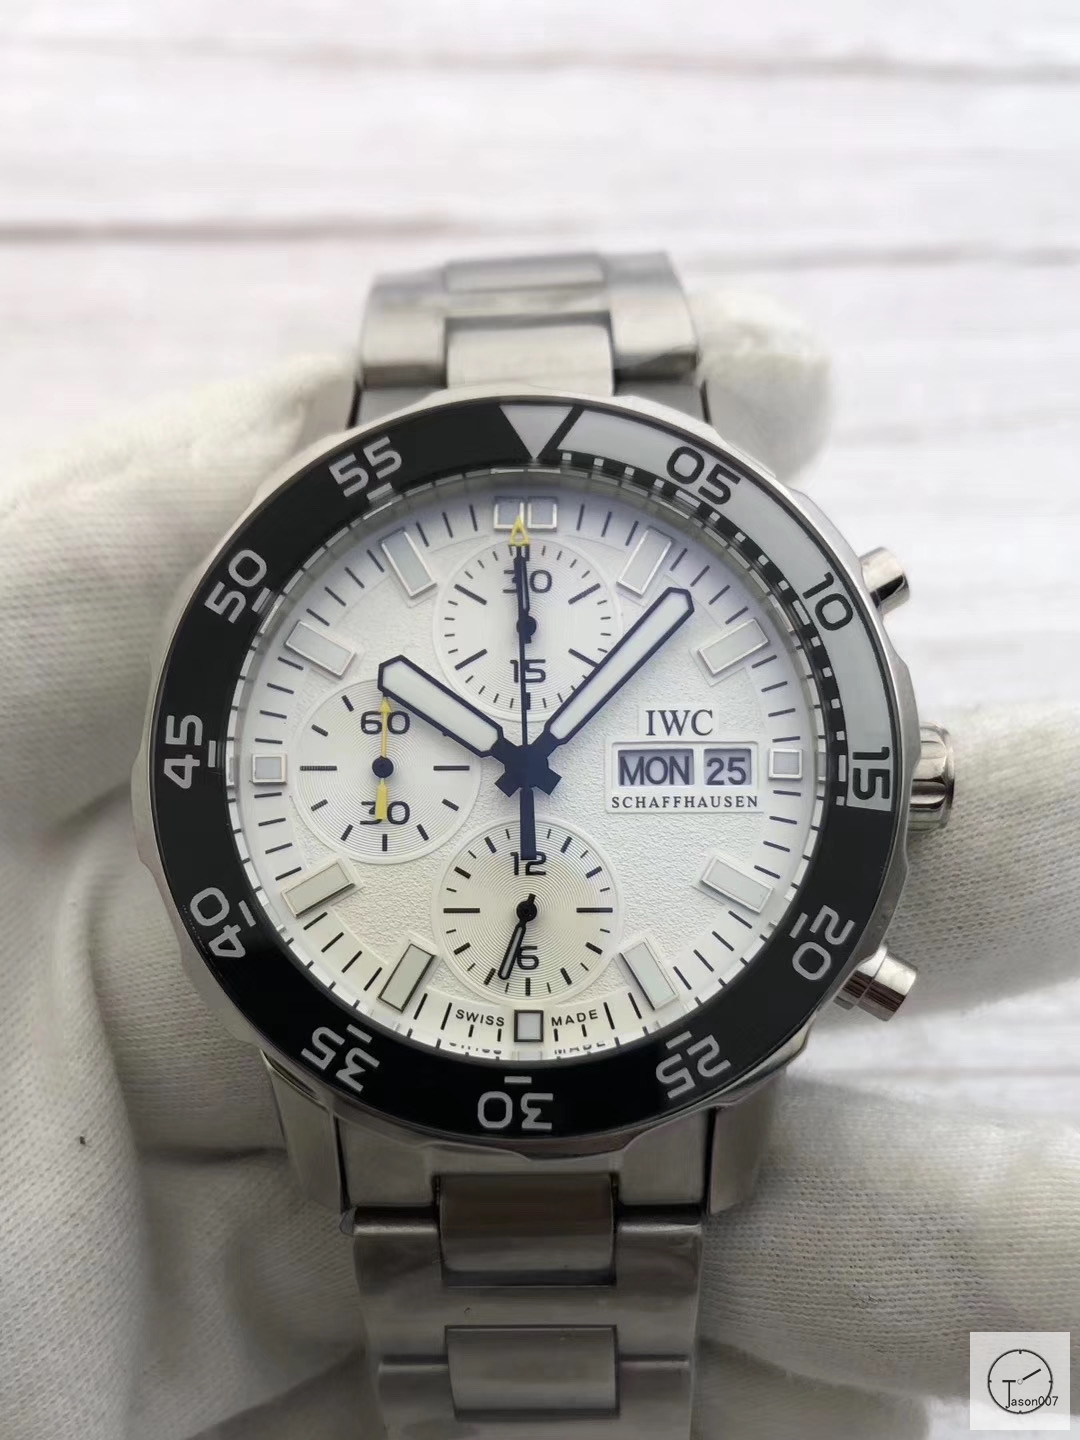 IWC Aquatimer Chronograph Black Silver Day Date Mens Watch IW376701 Stainless Steel Strap Mens Wristwatches ICW22770560